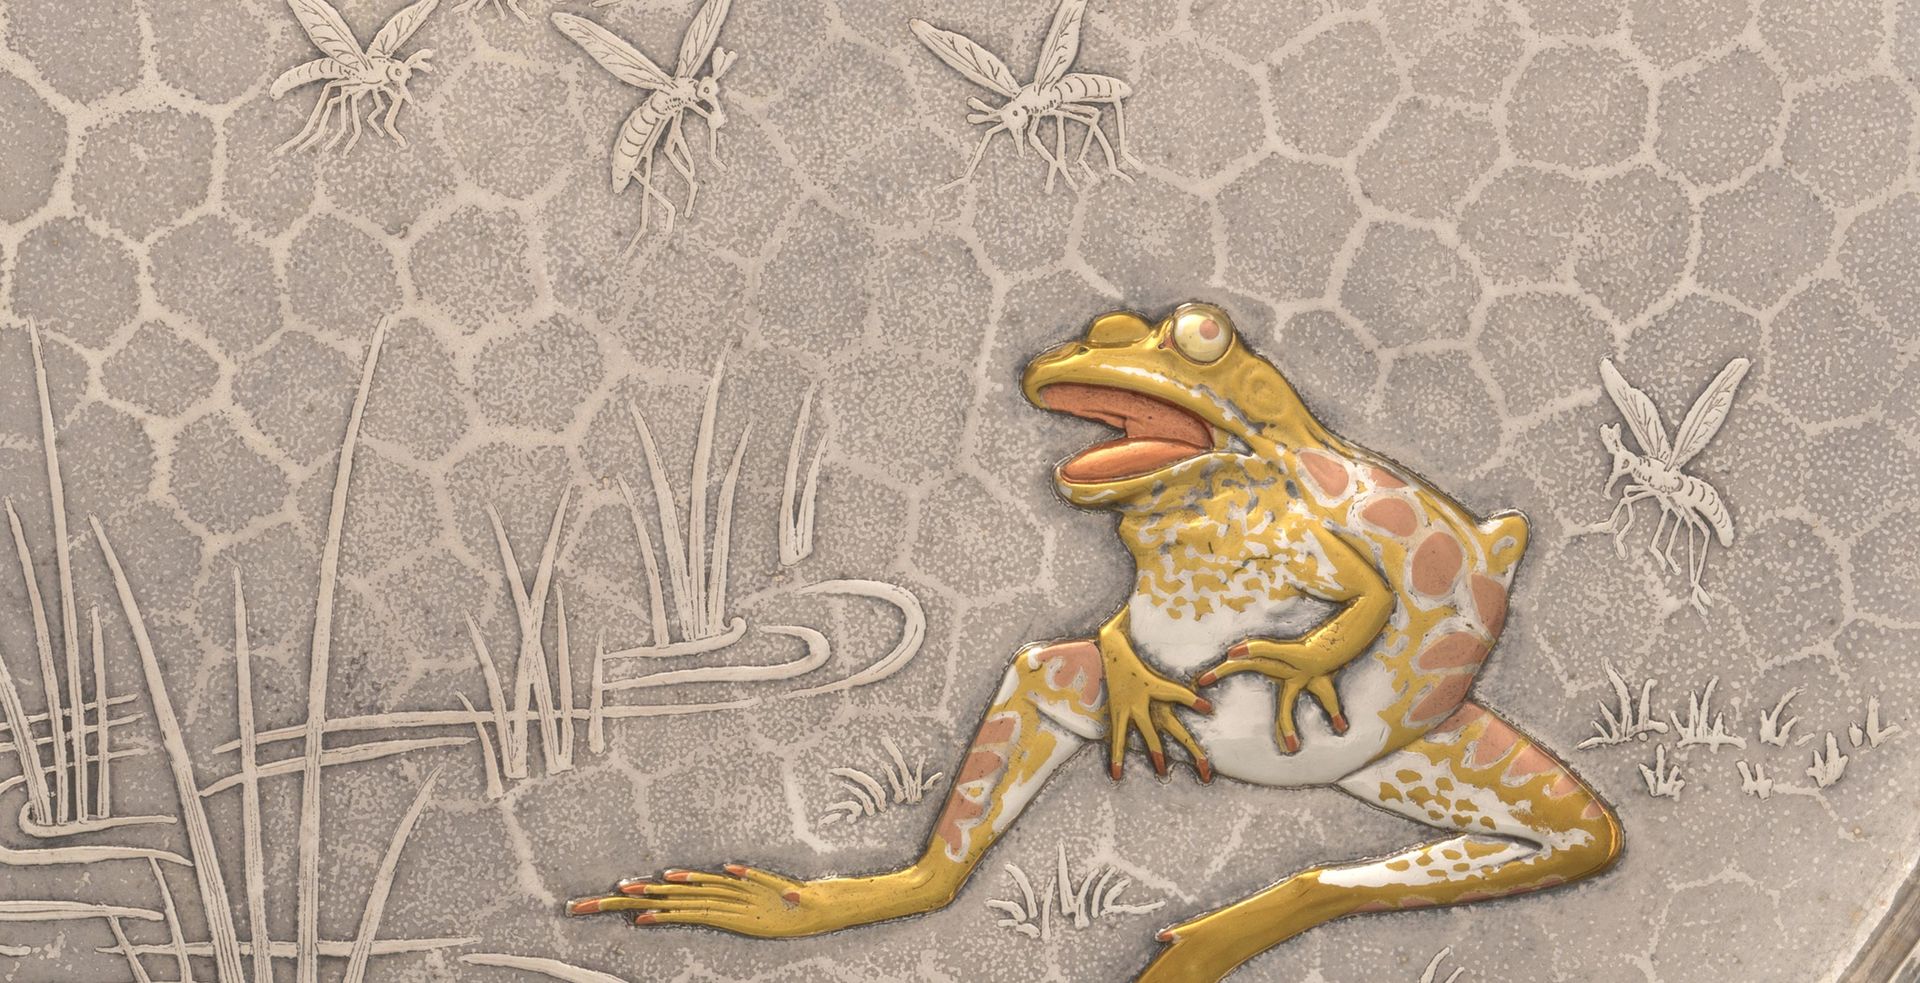 Detail of a silver tray featuring the design of a frog seated at the edge of a grassy pond with a queue of mosquitos approaching from a setting sun on the horizon. The surface has a hexagonal-shaped texture. The grass and mosquitoes protrude in a low relief on the tray surface. The front is more heavily sculpted and plated with mixed metals that are silver, gold, and copper in tone.